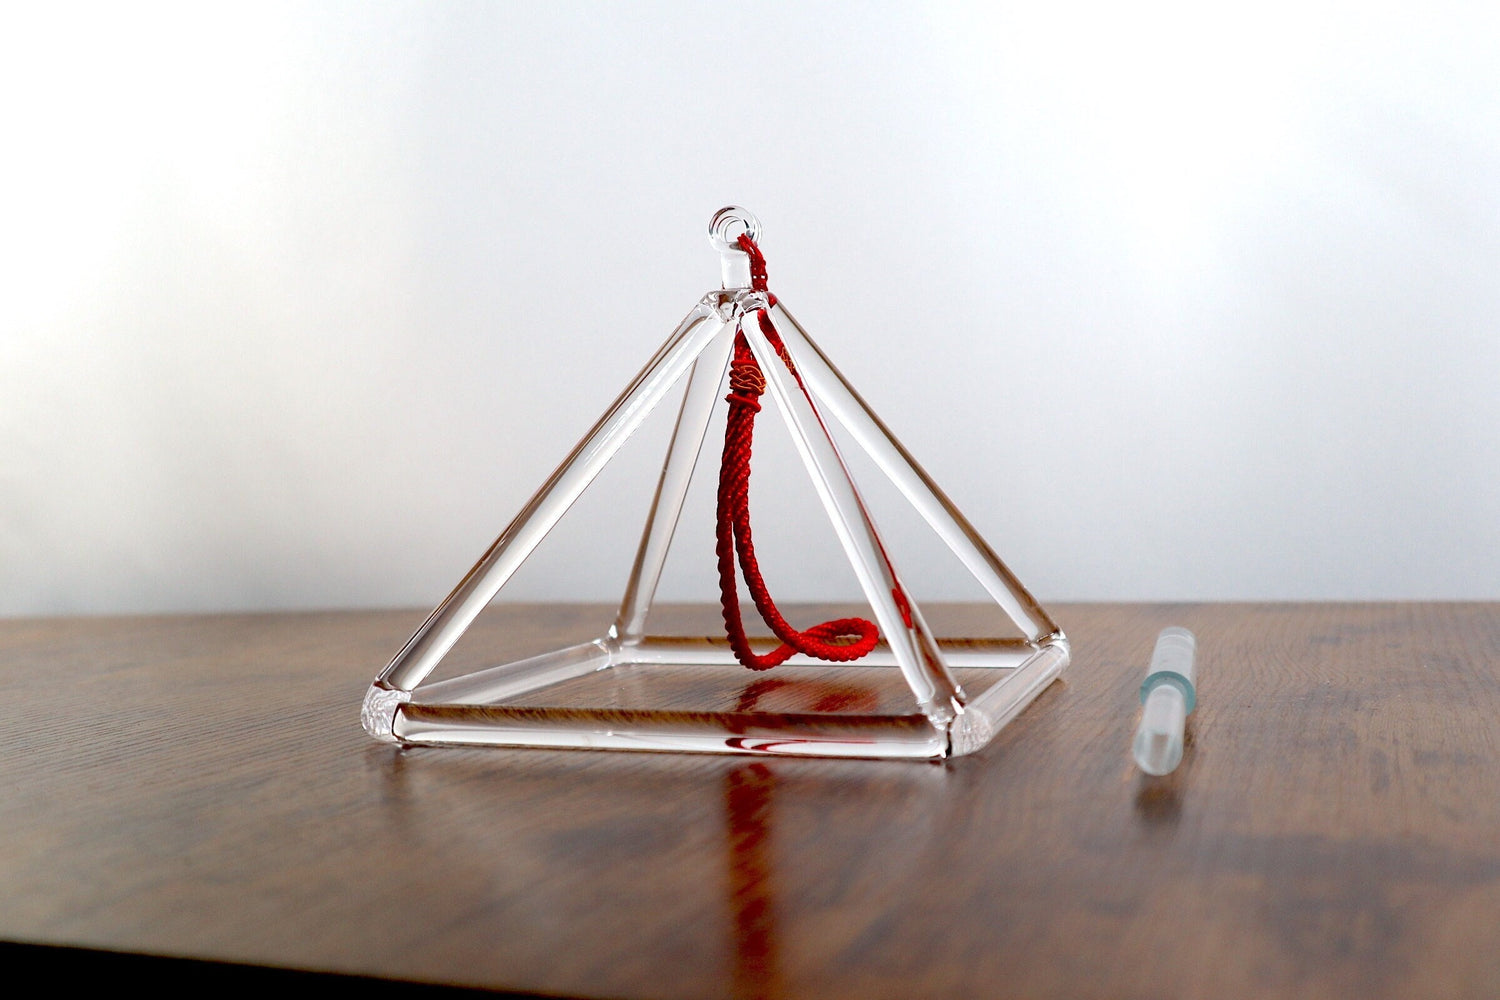 6” Clear Quartz Crystal Singing Pyramid Sound Vibration Musical Instrument With Crystal Striker And Padded Carry Case